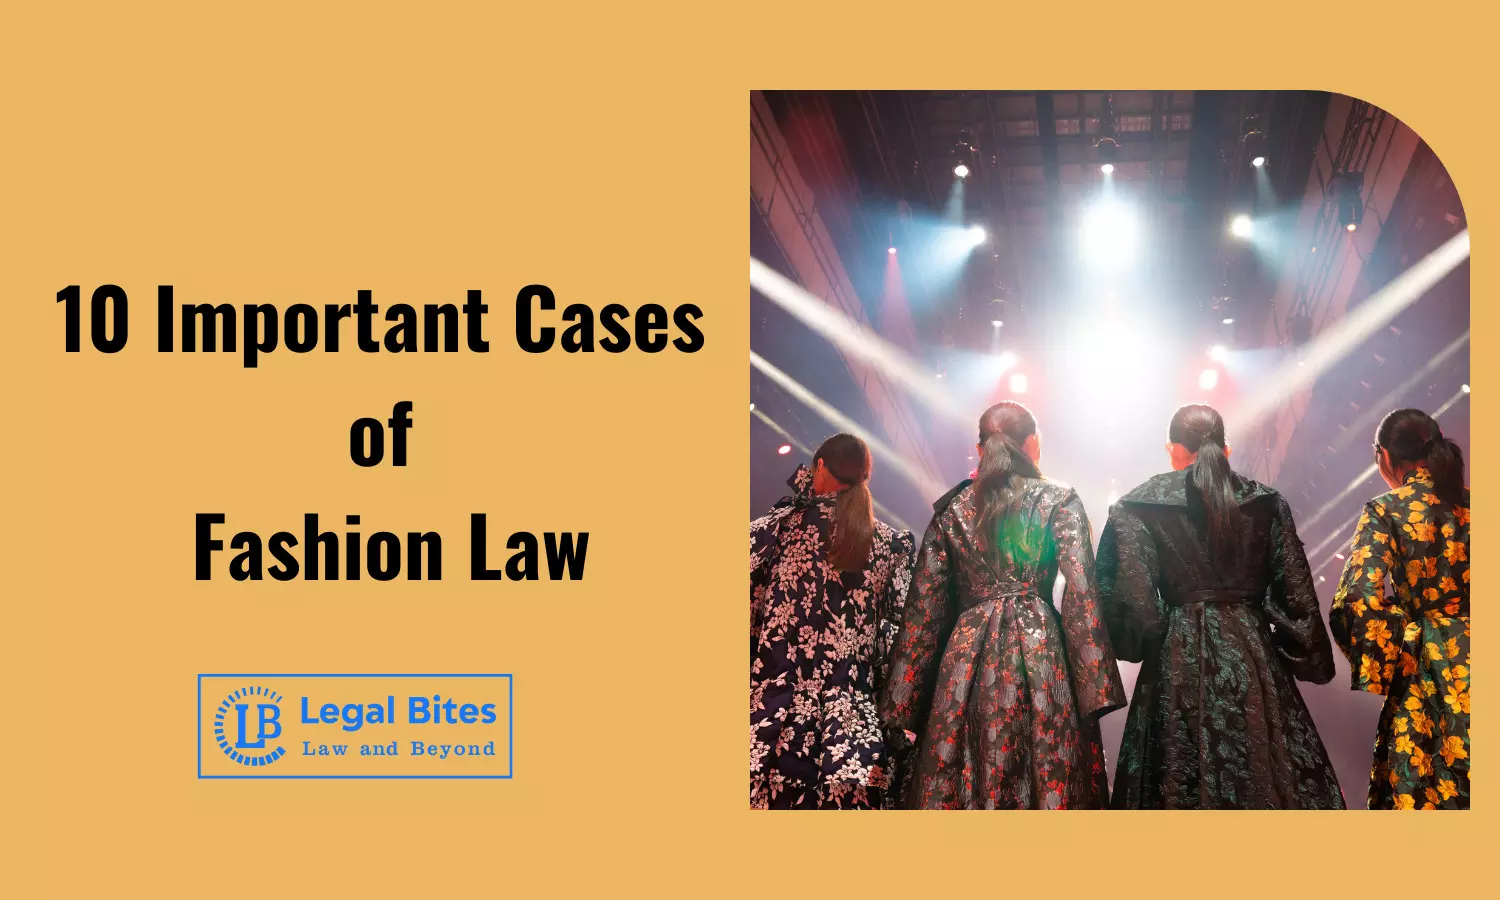 10 Important Cases of Fashion Law